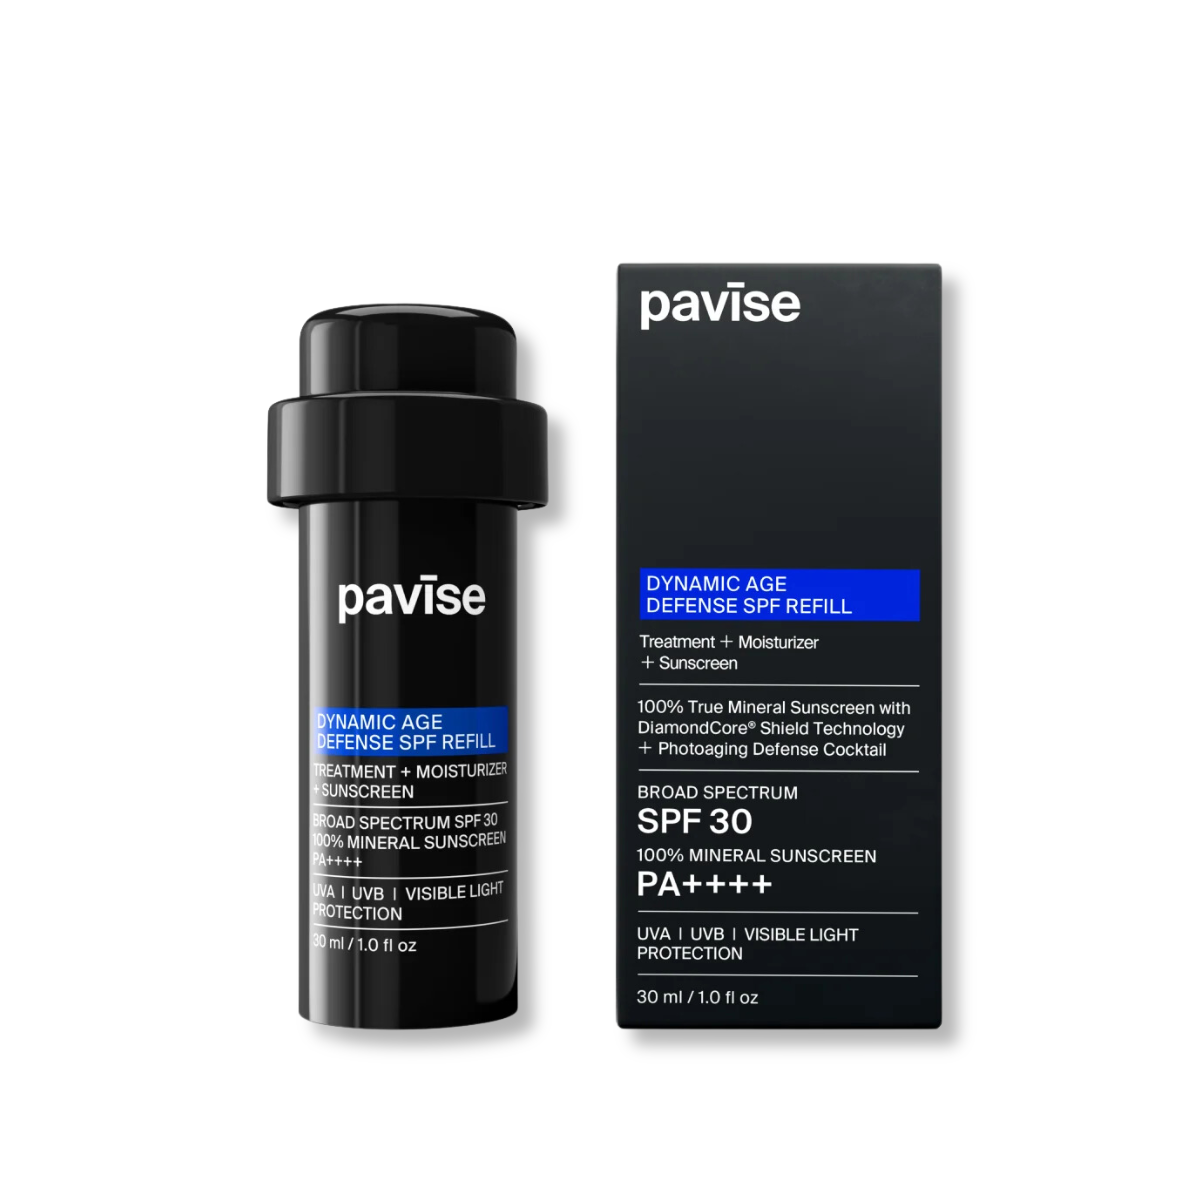 Pavise Dynamic Age Defense SPF 30 Refill Shop at Exclusive Beauty